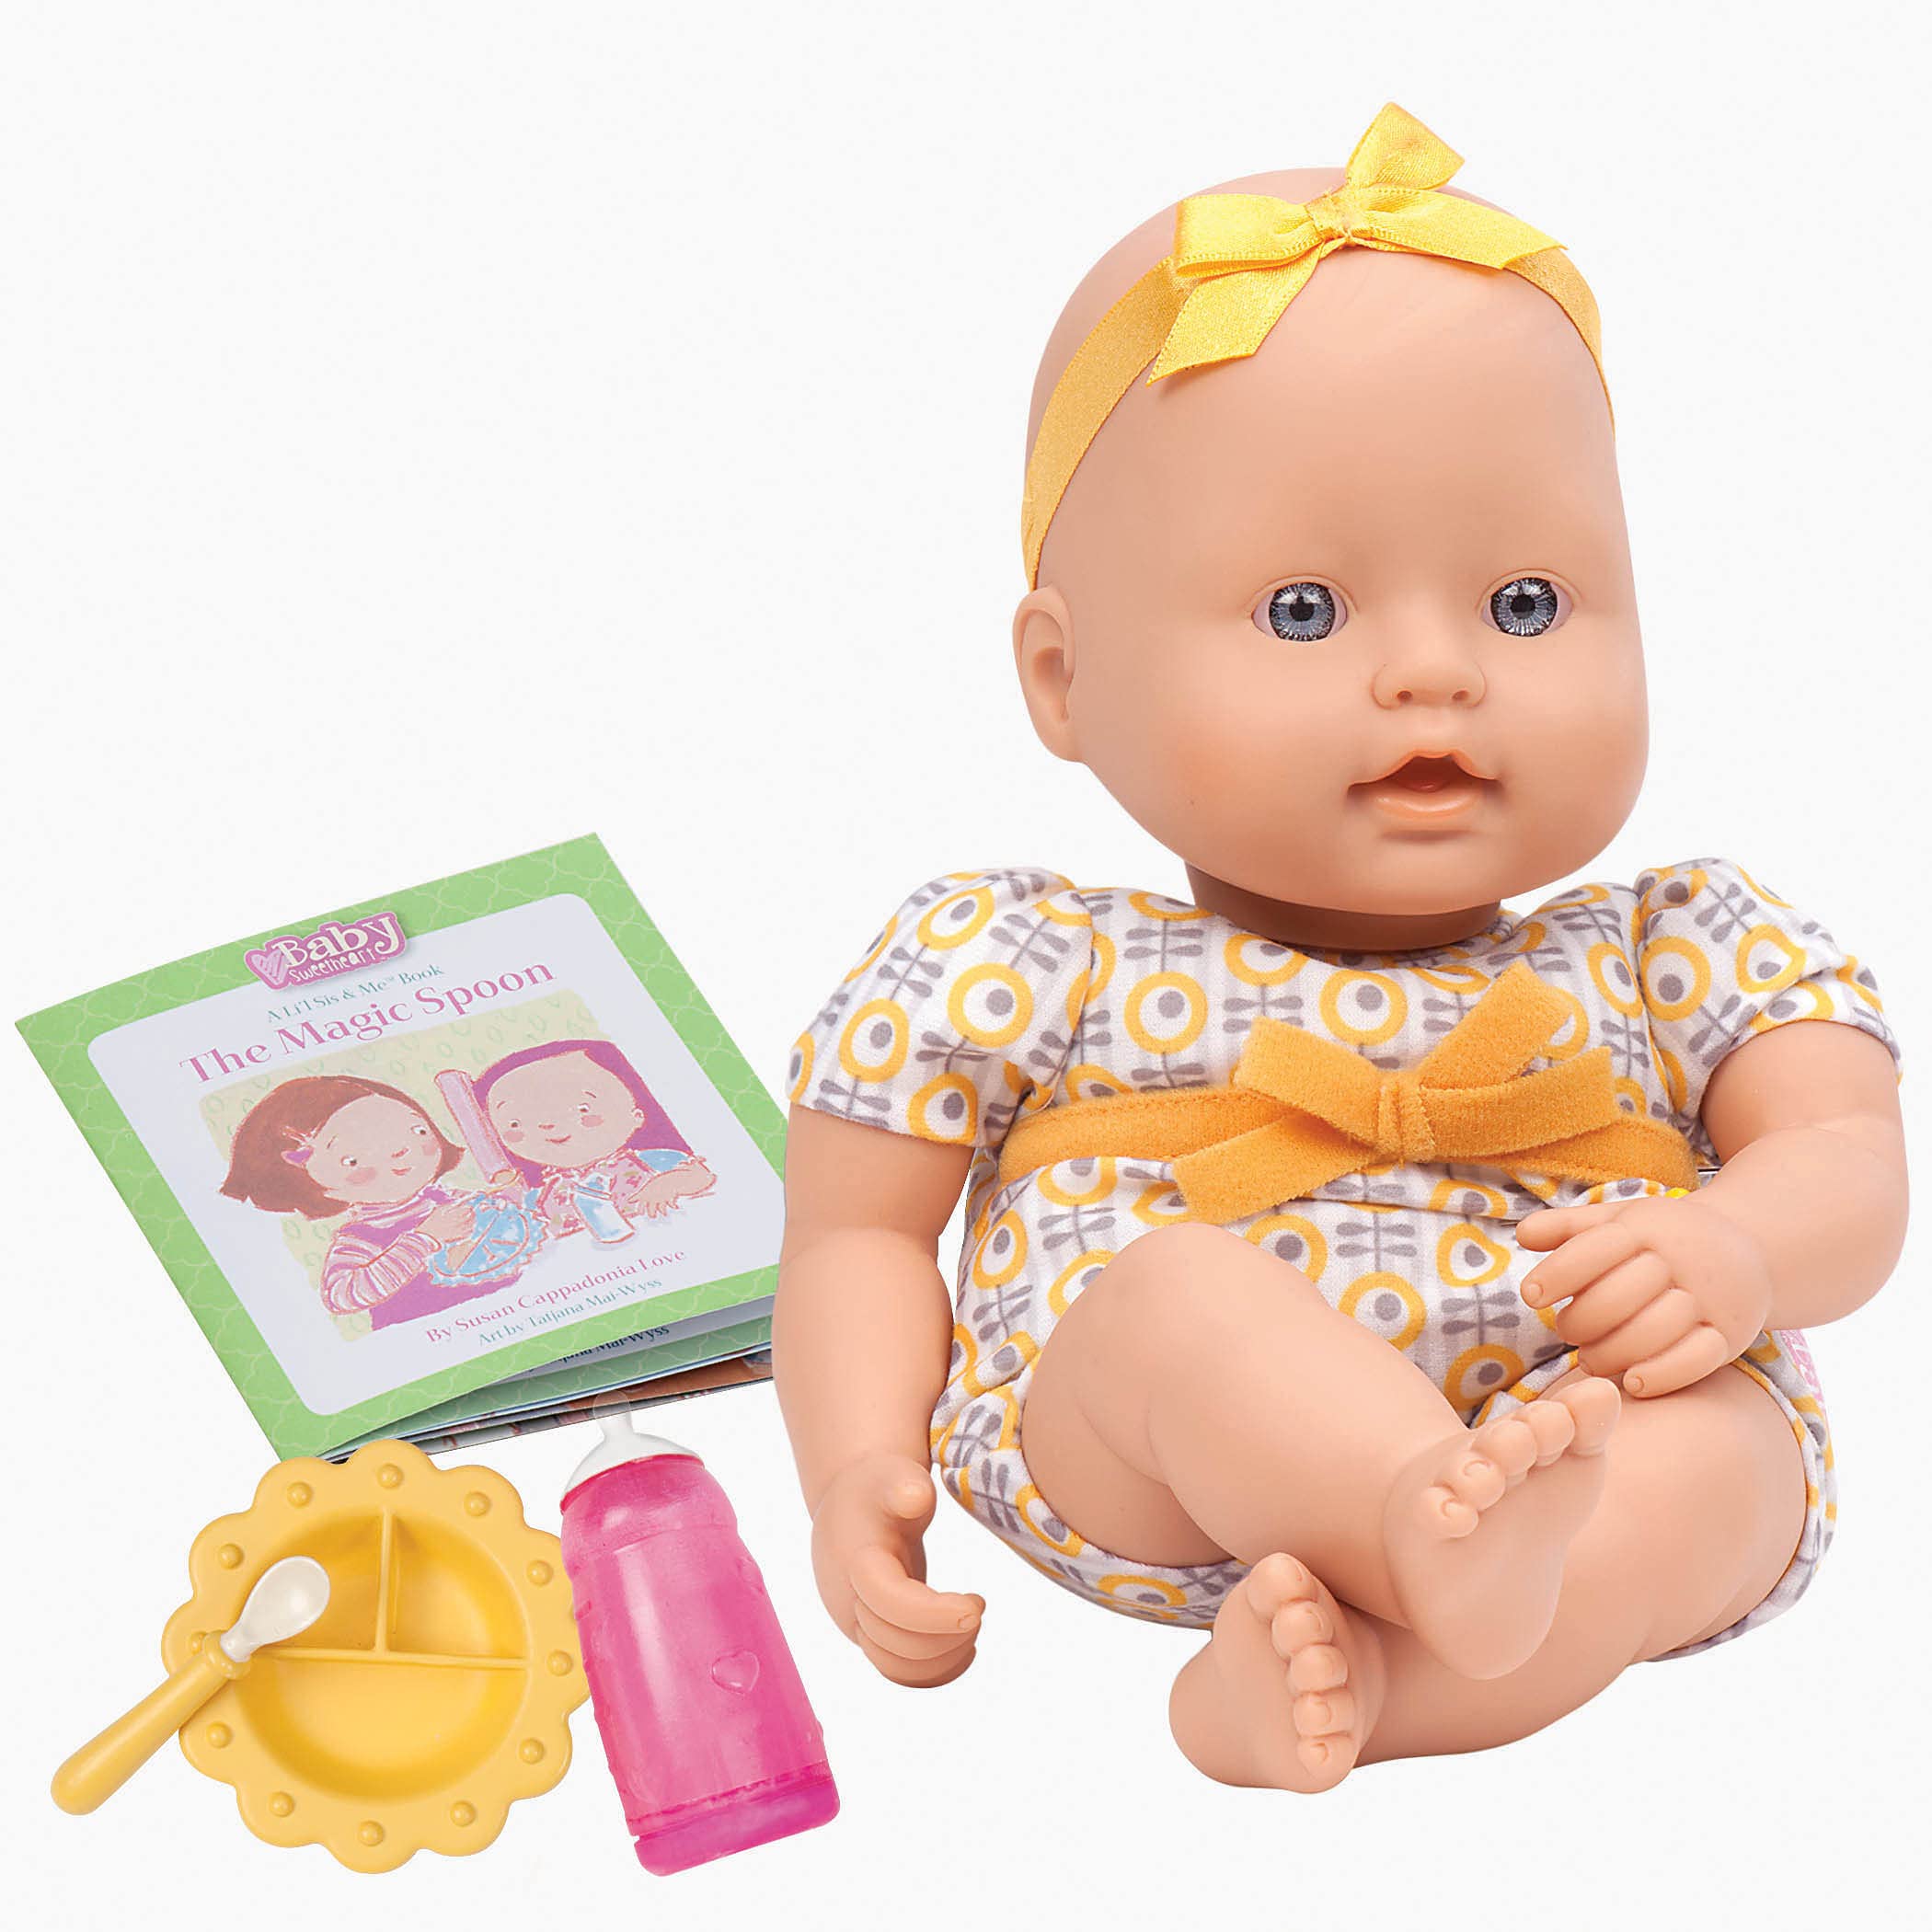 Baby Sweetheart by Battat - Feeding Time 12-inch Soft-Body Newborn Baby Doll with Easy-to-Read Story Book and Baby Accessories